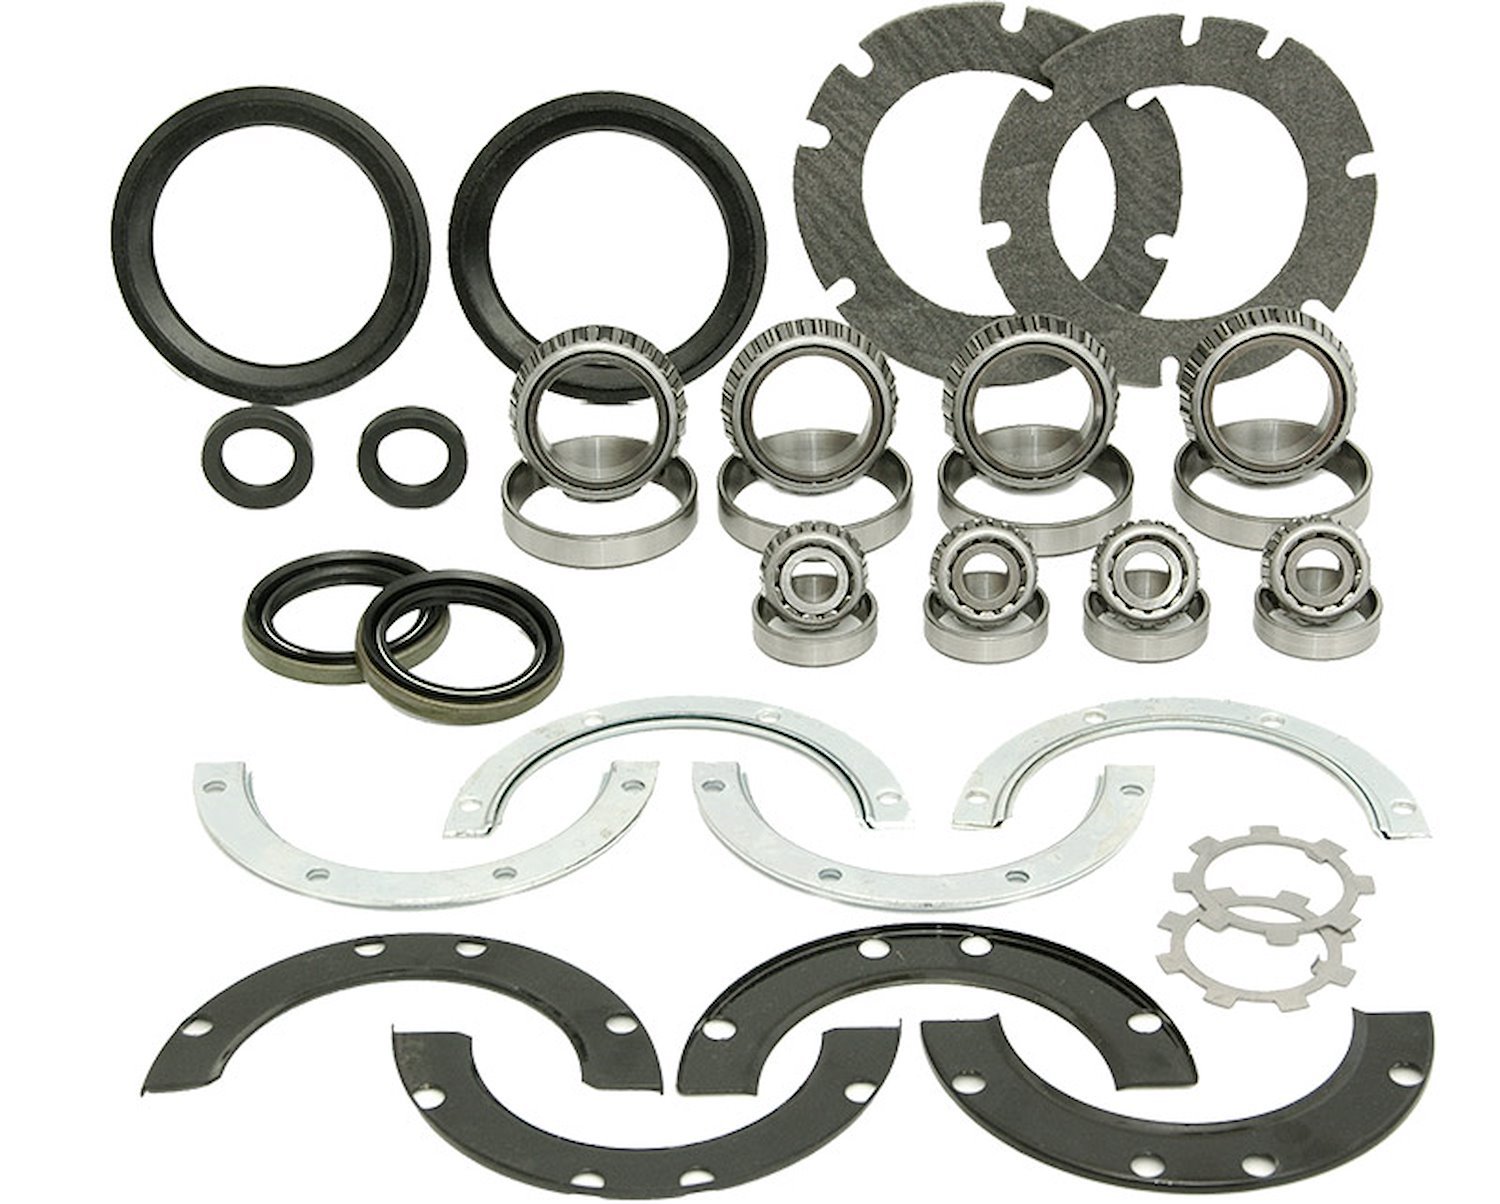 Front Axle Service Kit Fits Select 1986-1995 Suzuki Models